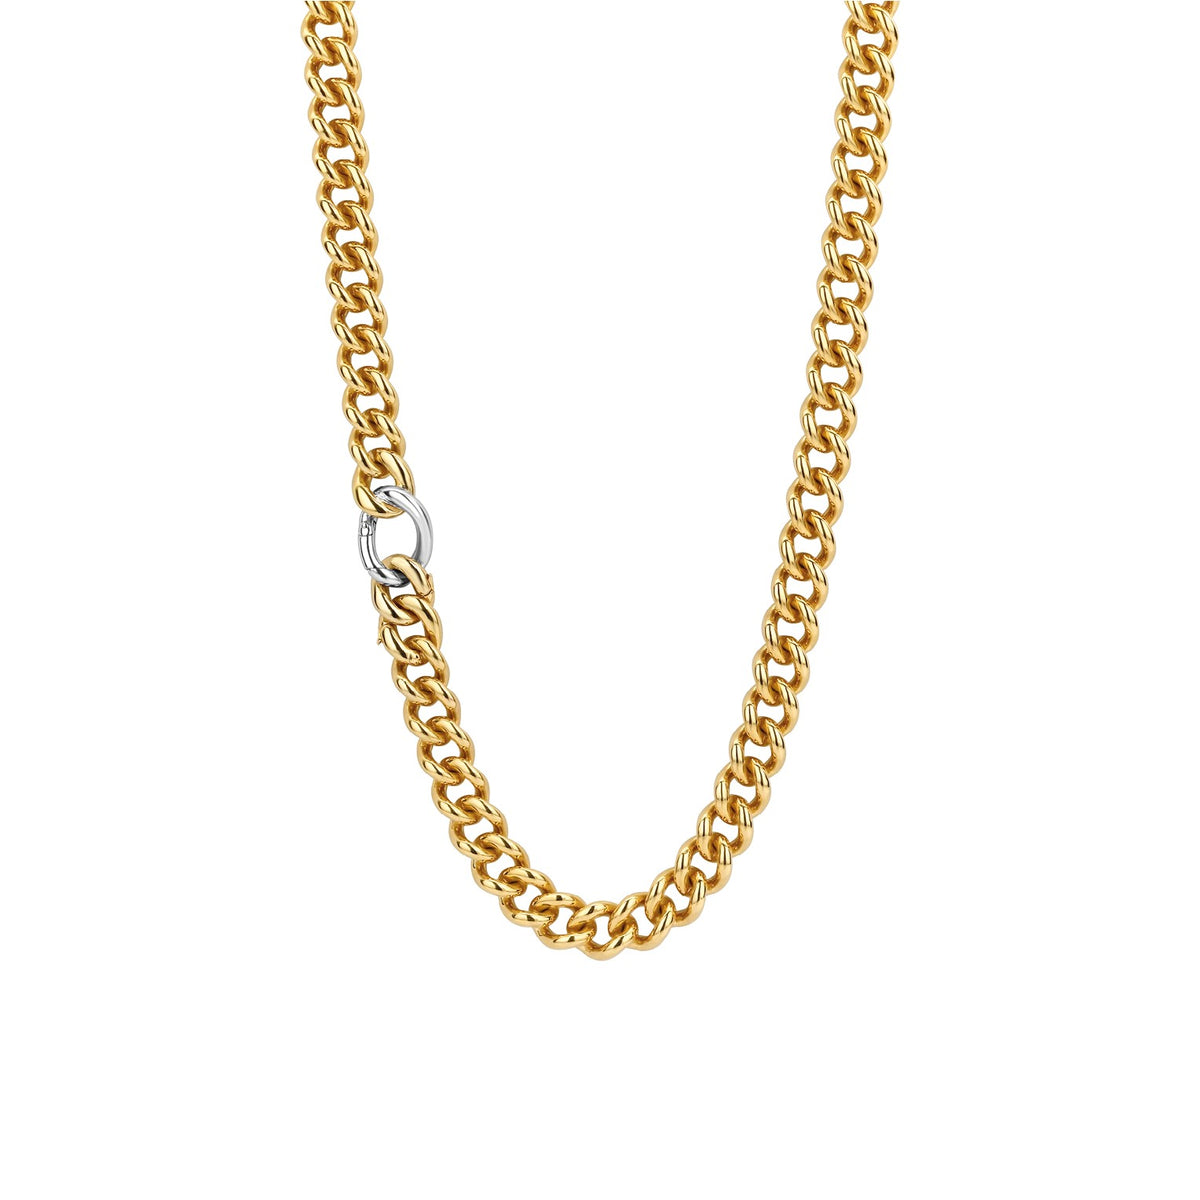 TI SENTO Sterling Silver Gold Tone Heavy Link Necklace